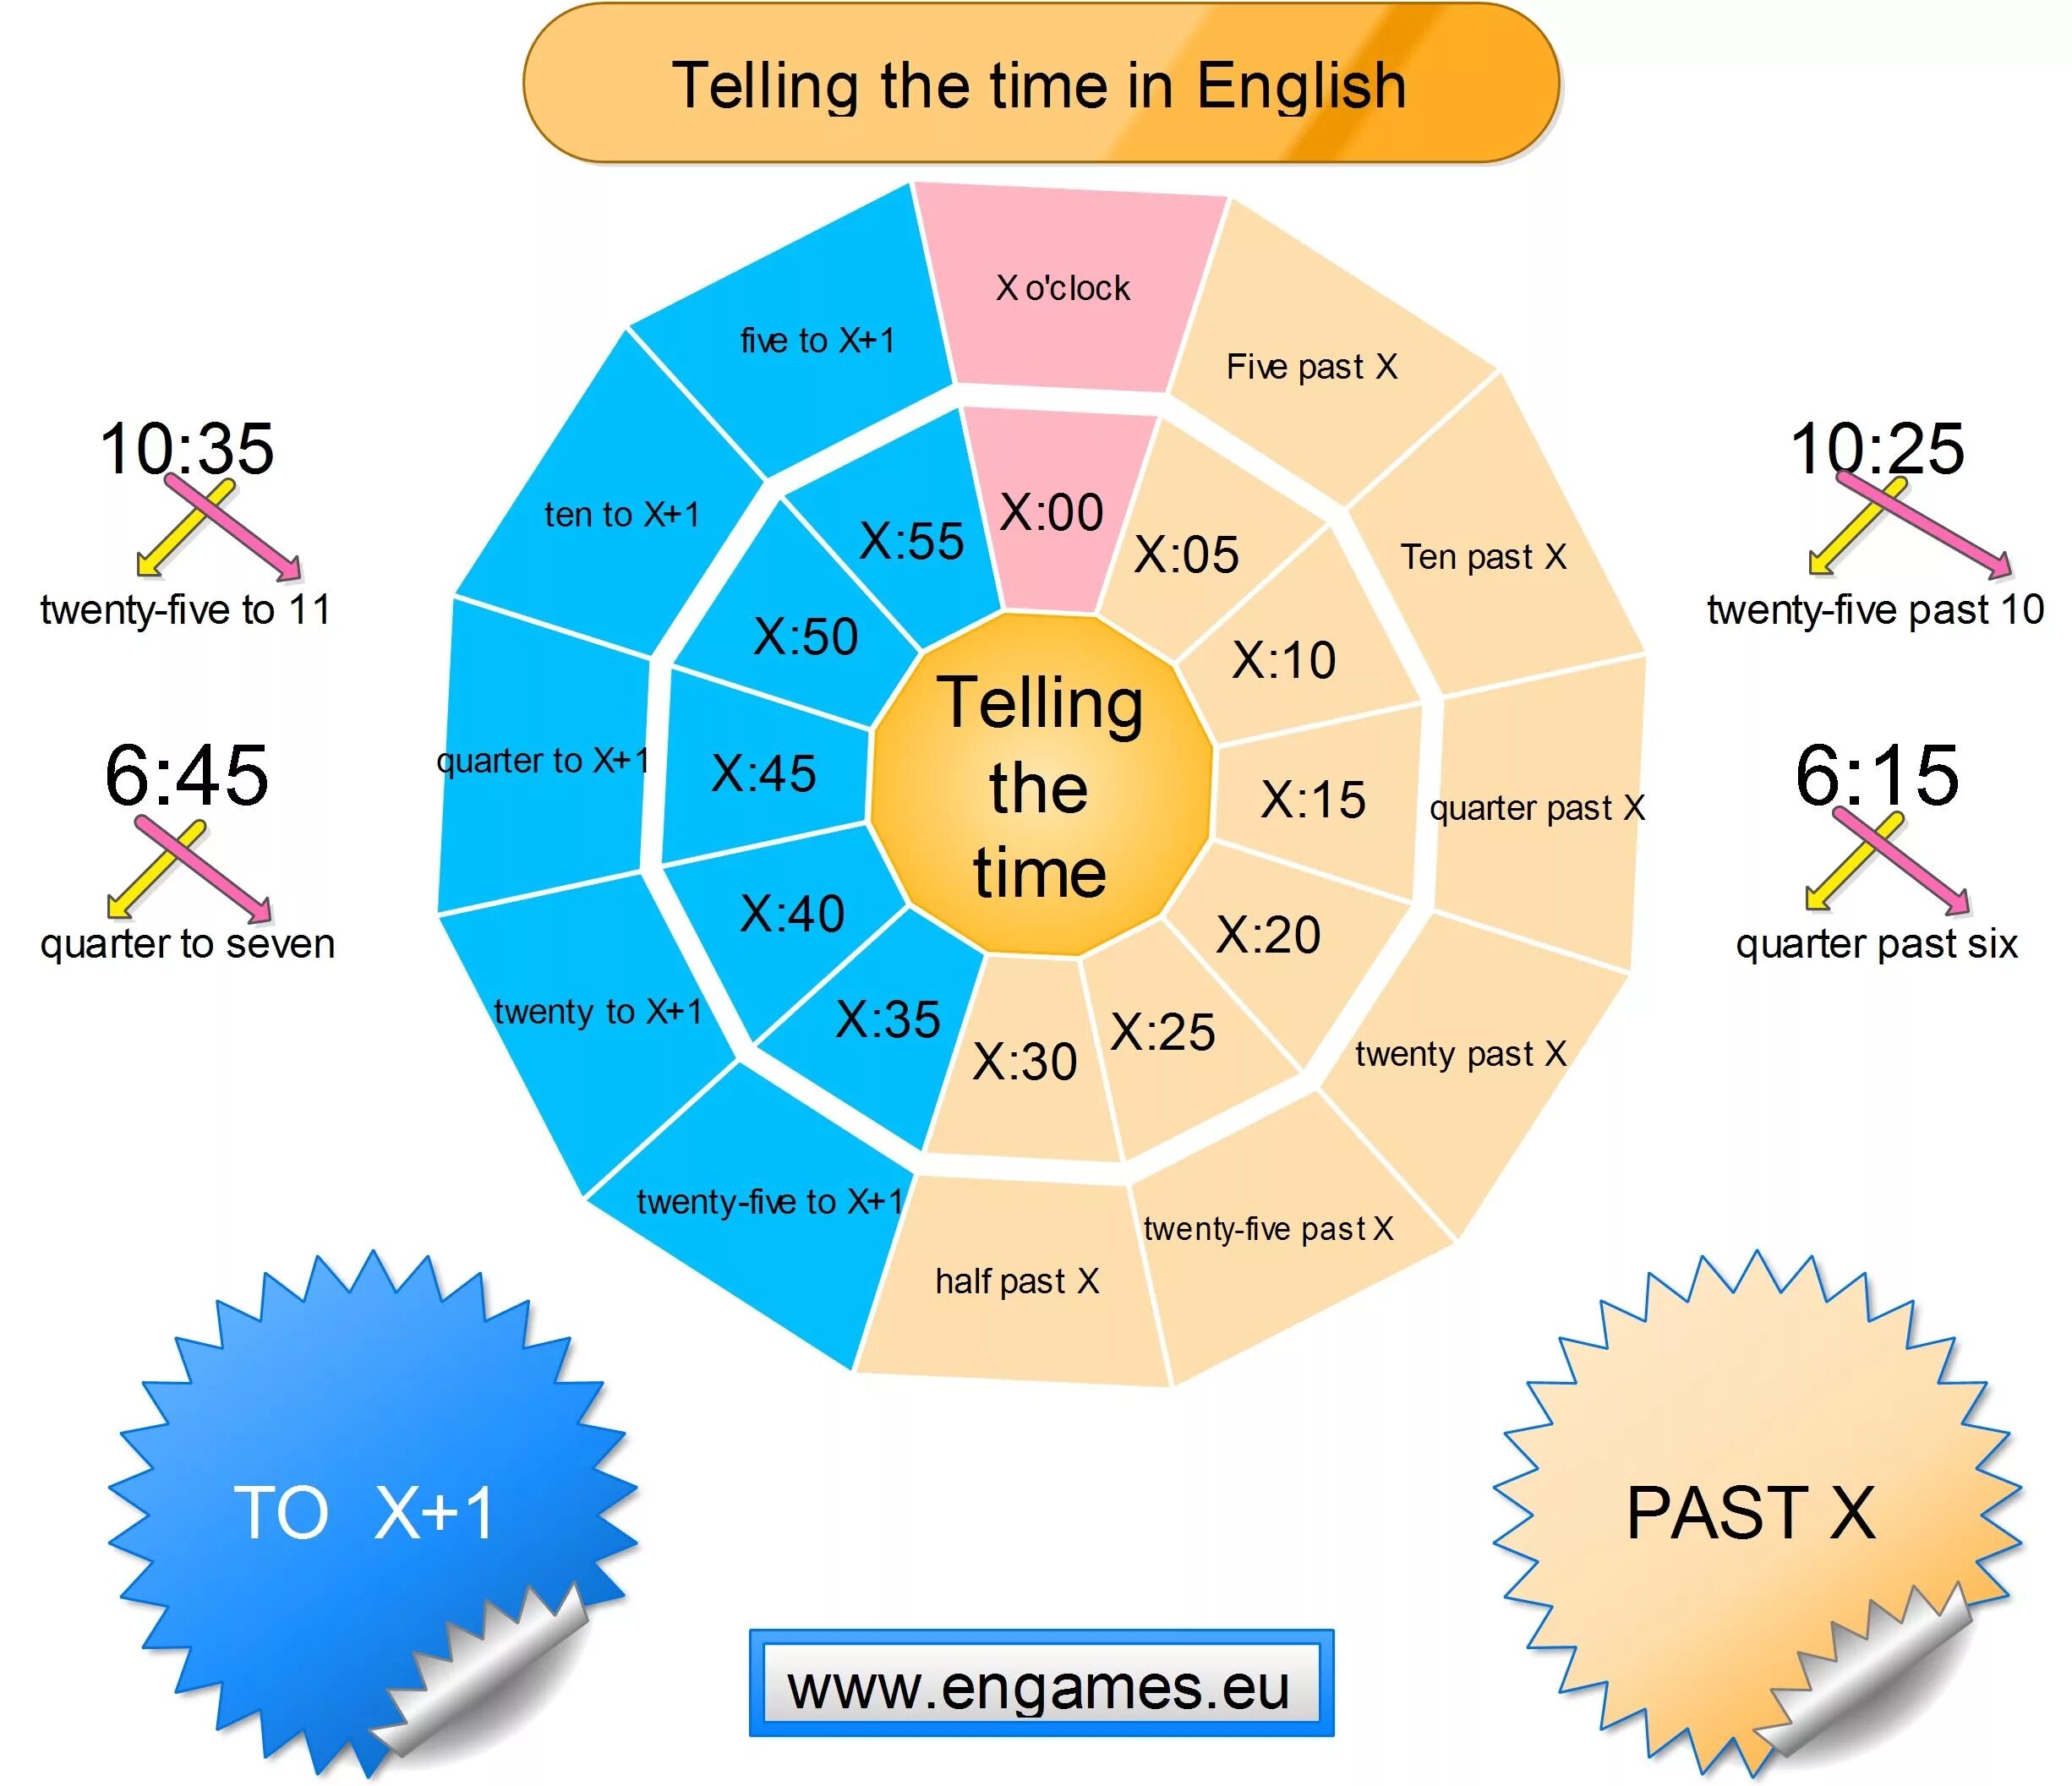 Telling перевод на русский. Time in English. Telling the time английский язык. Времена in English. Telling the time in English.